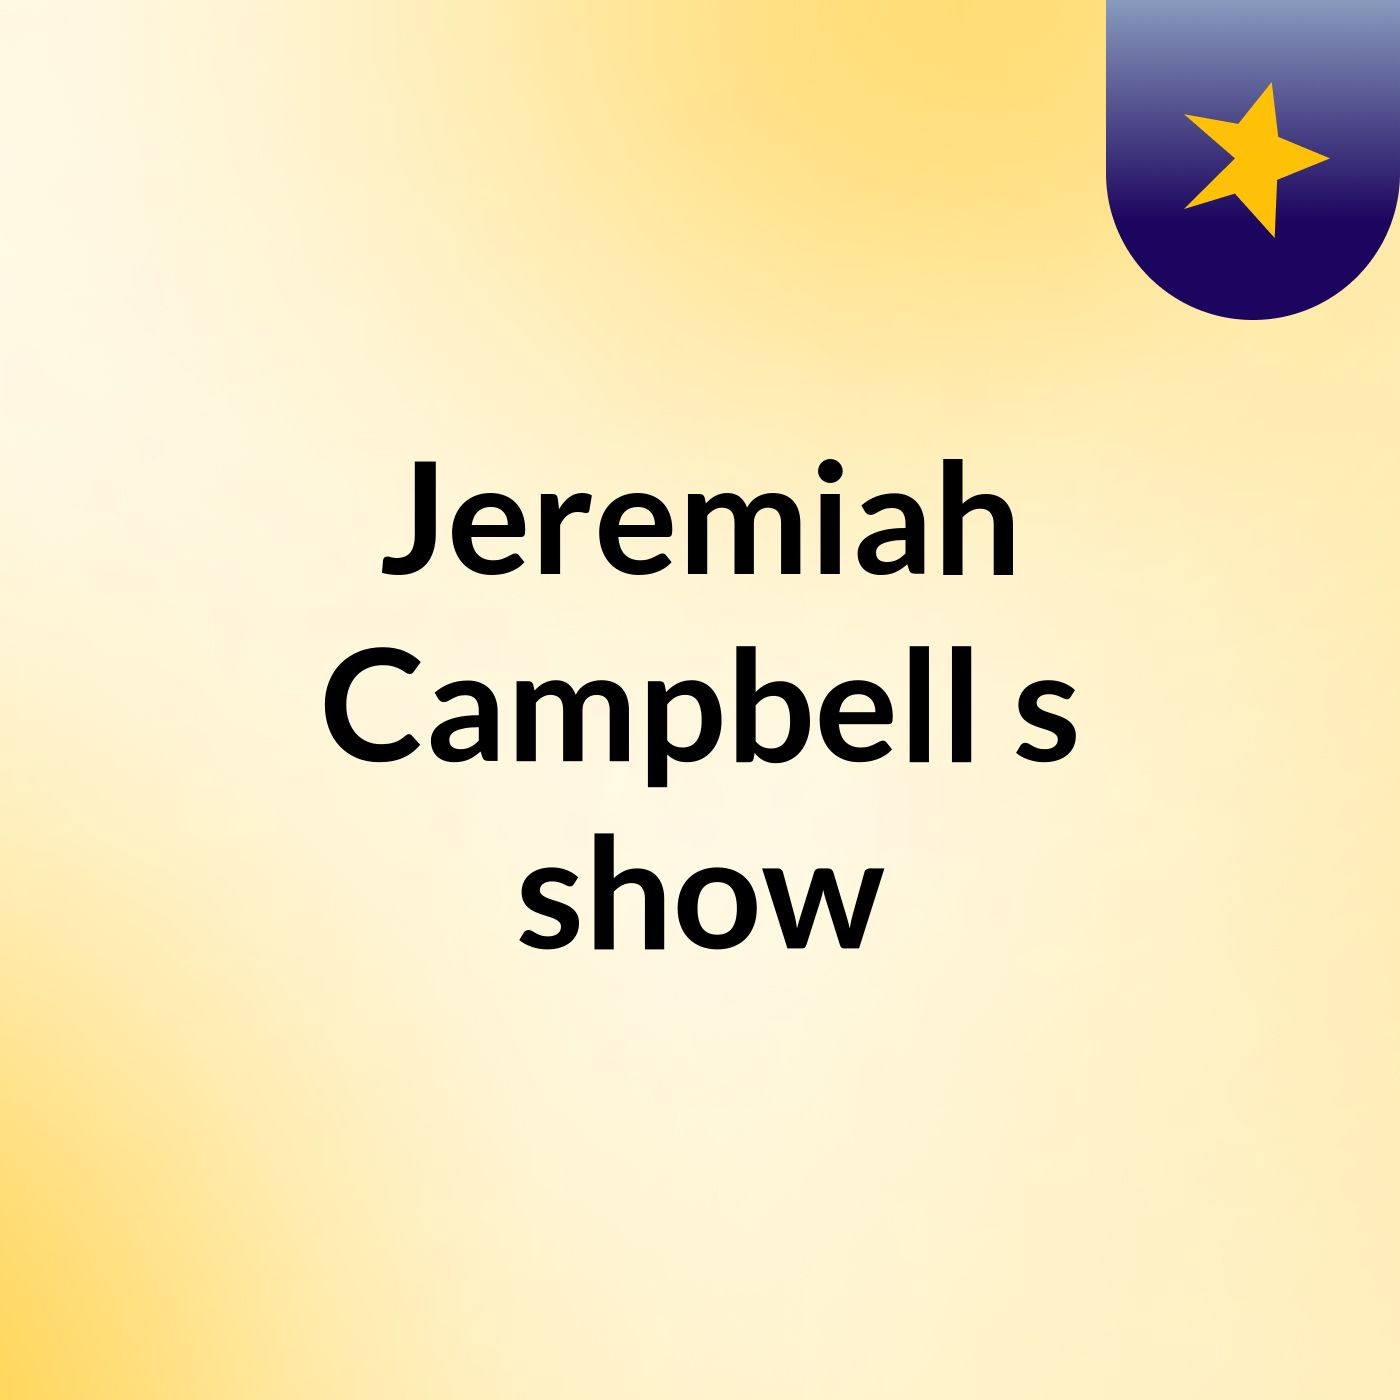 Jeremiah Campbell's show